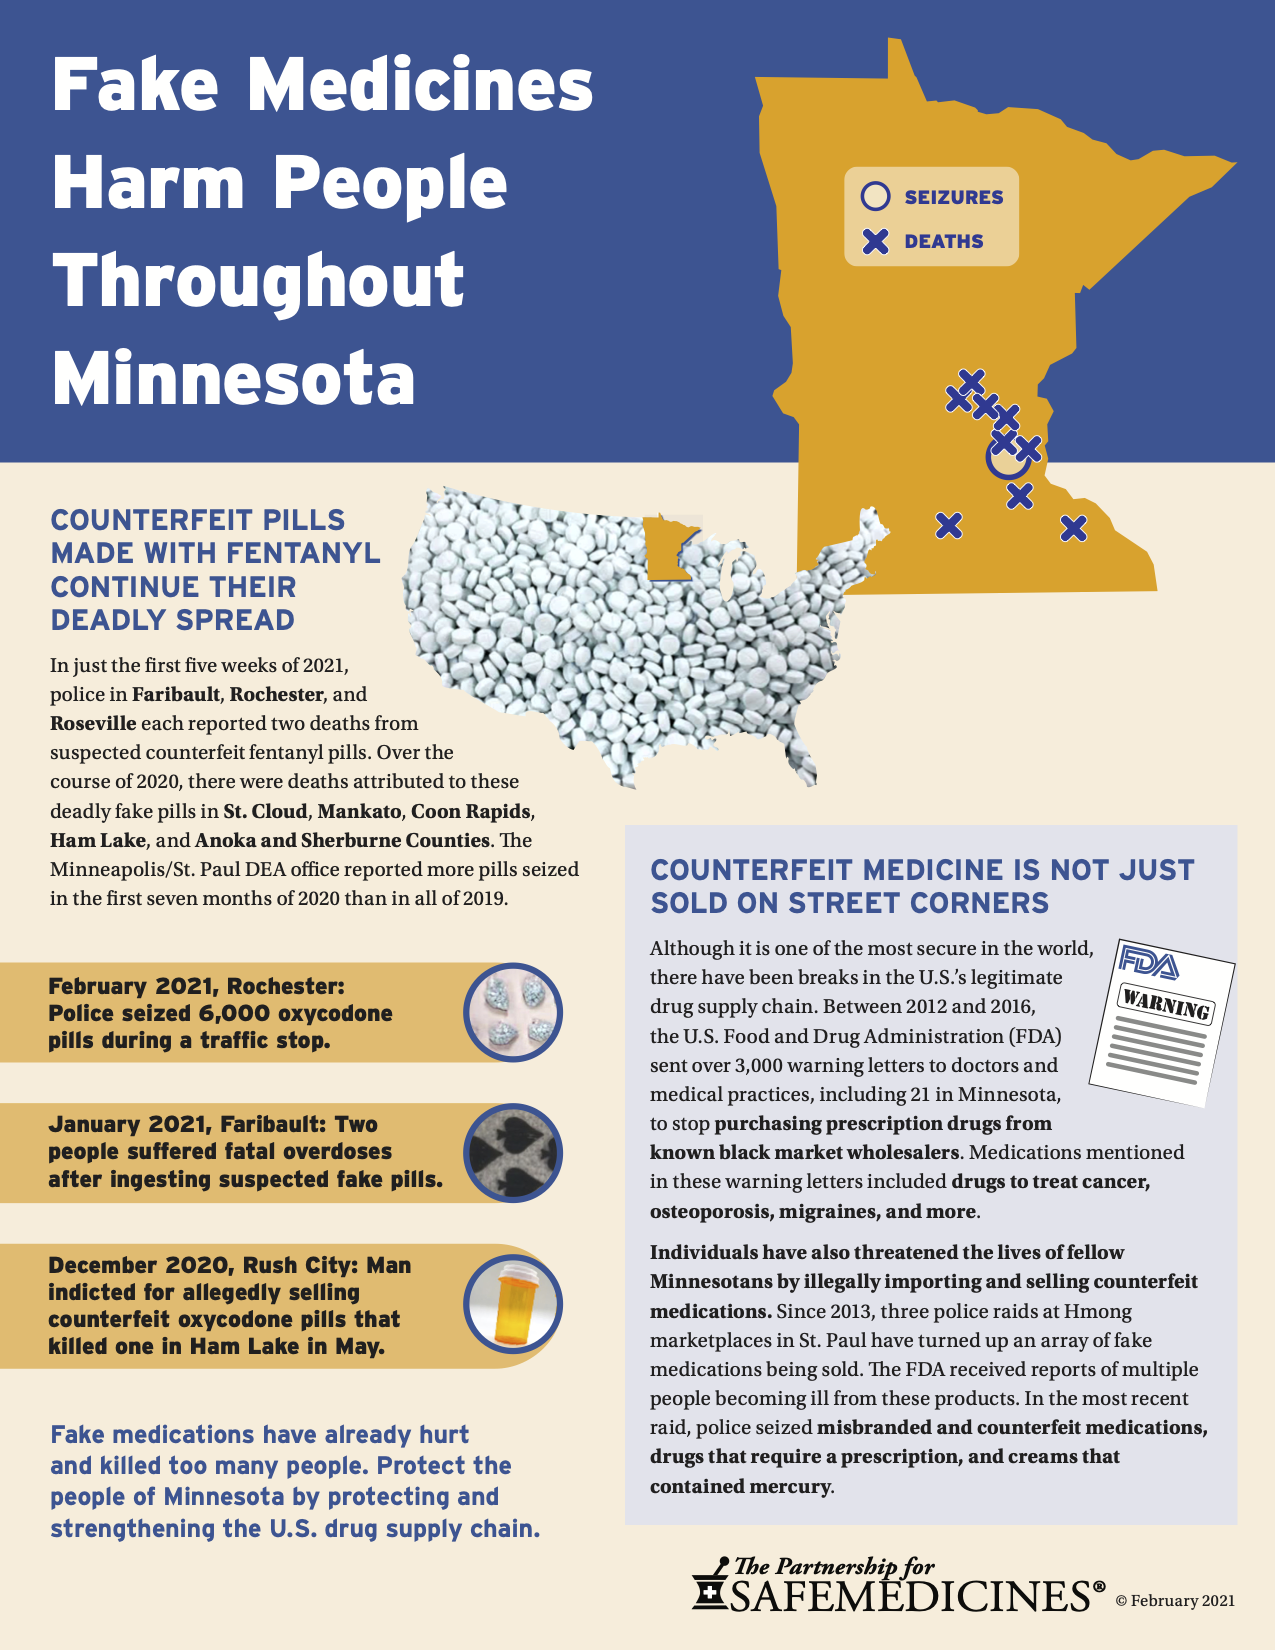 <a href="https://www.safemedicines.org/wp-content/uploads/2019/09/MN-2021-update-infosheet-SECURE.pdf">Download our February 2021 PDF</a>